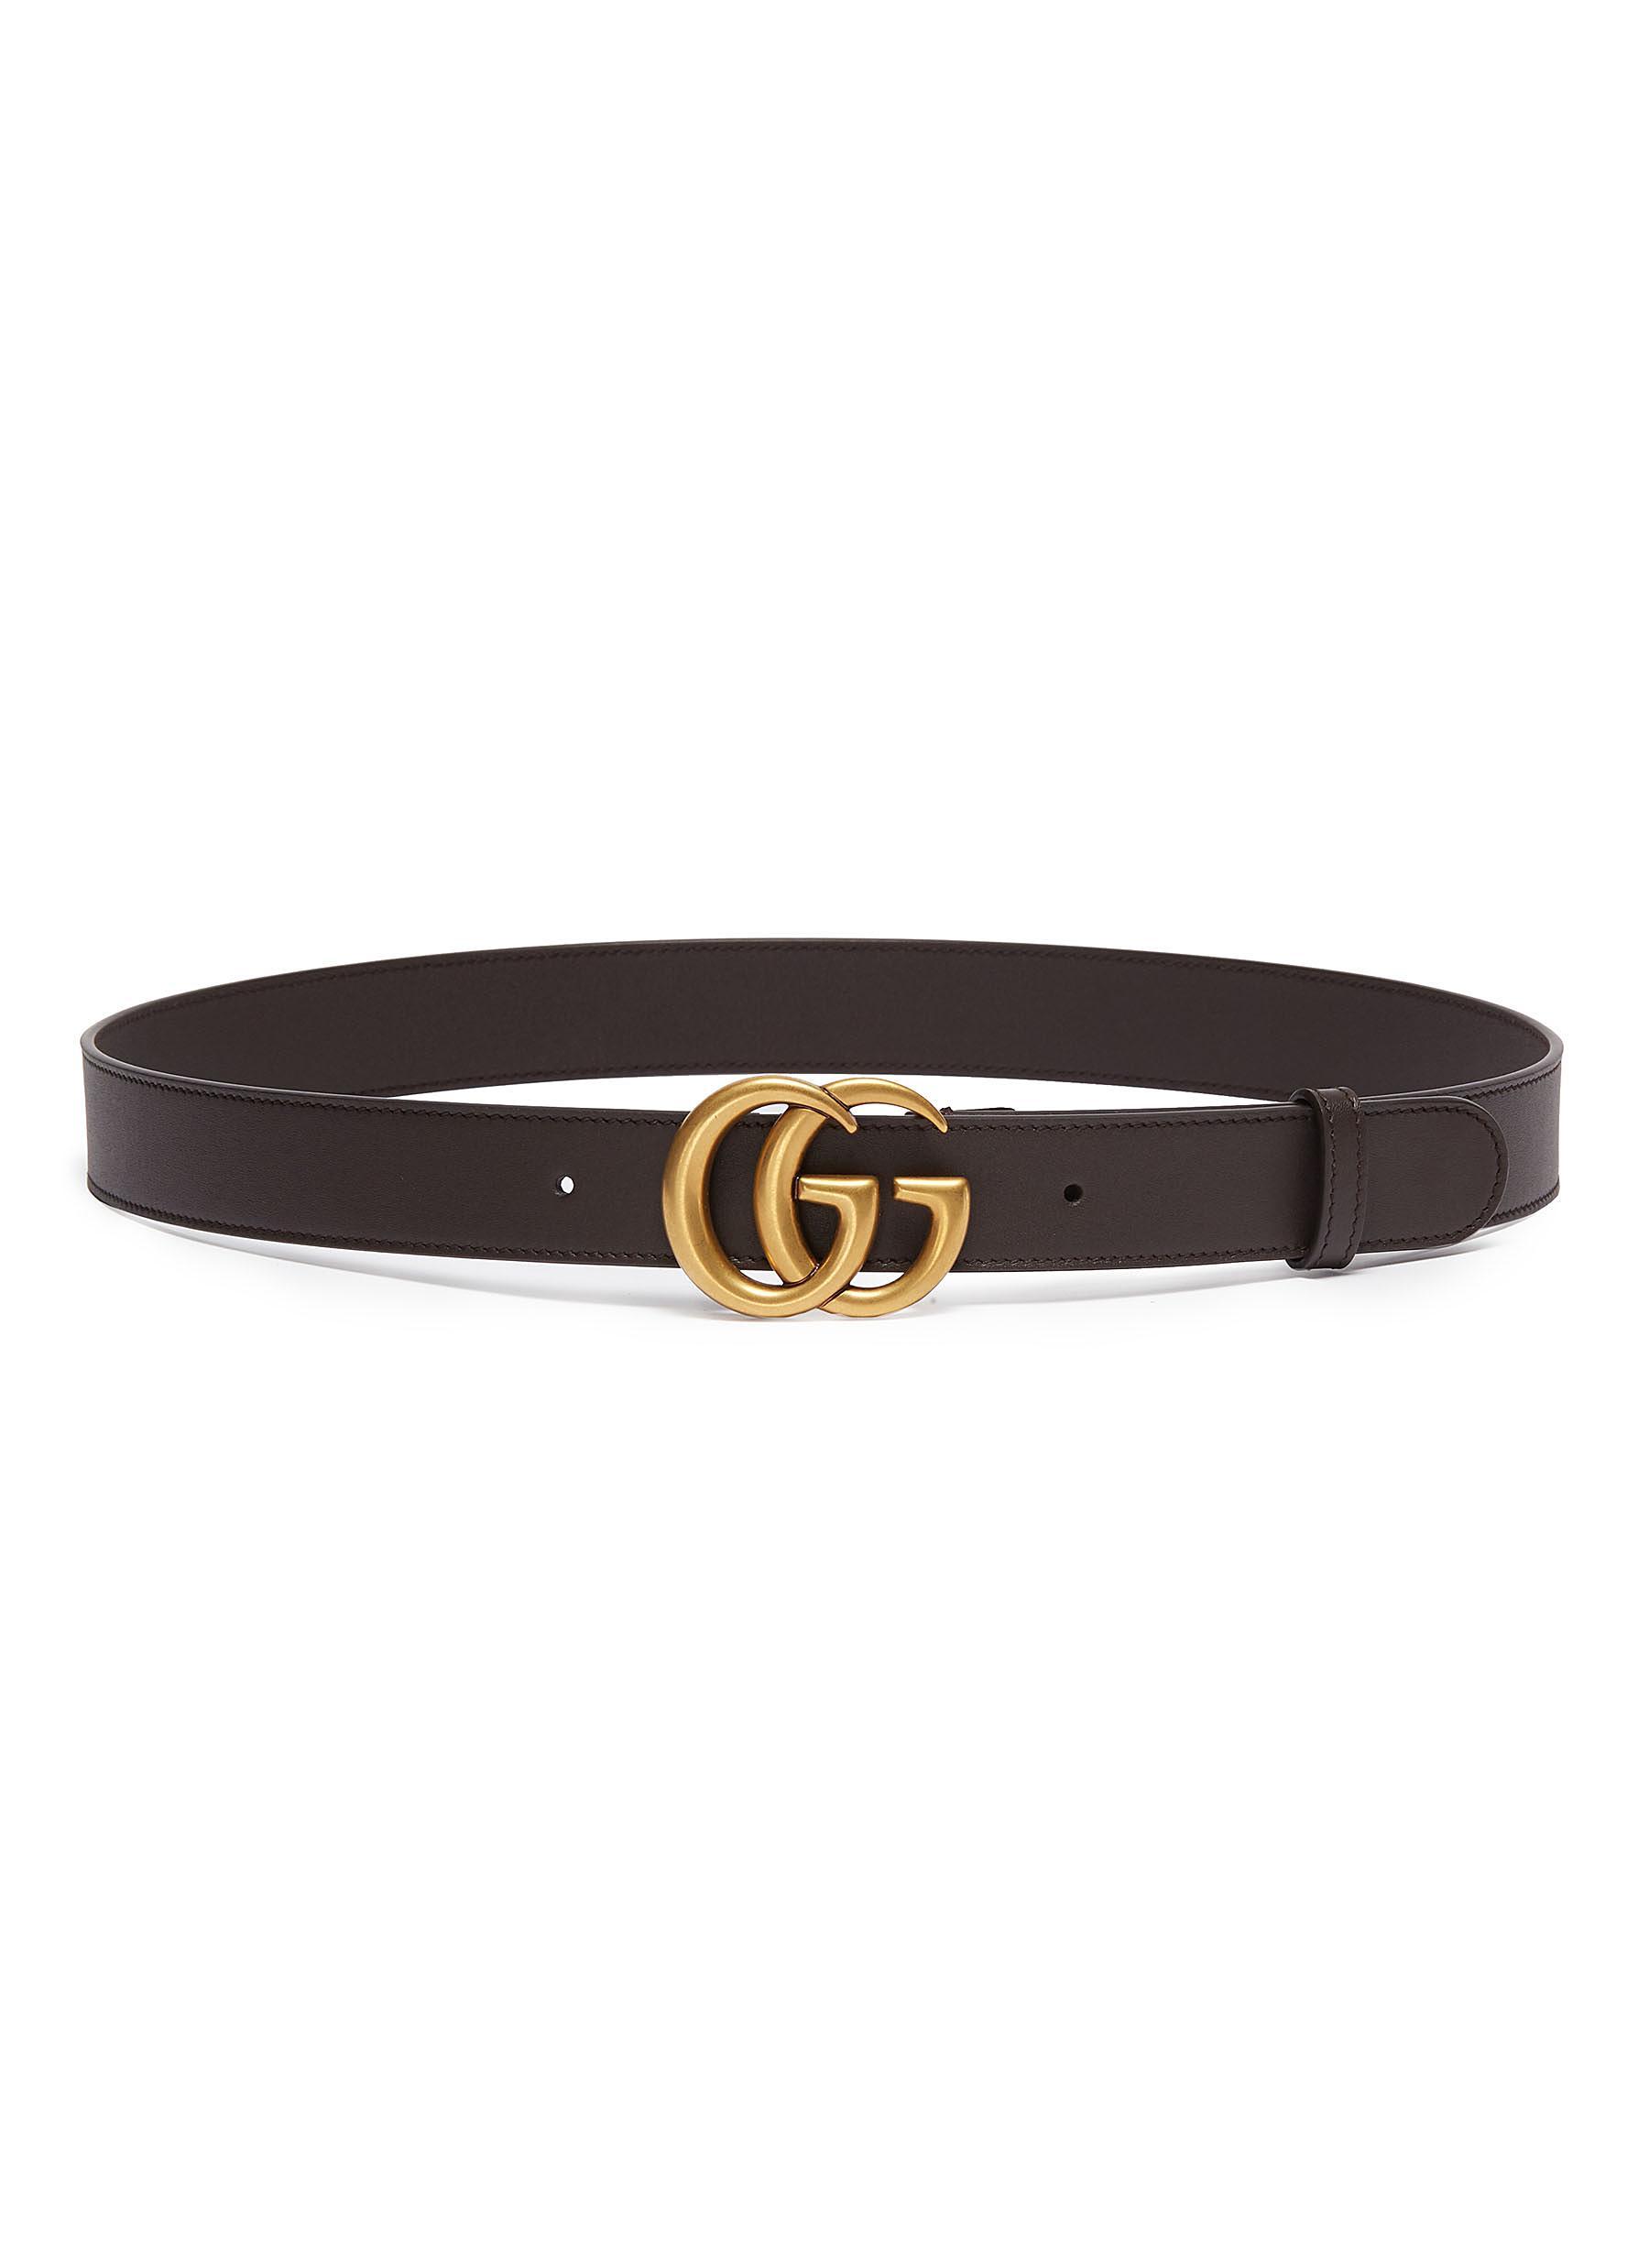 Gucci GG Logo Buckled Leather Belt in Brown for Men - Lyst